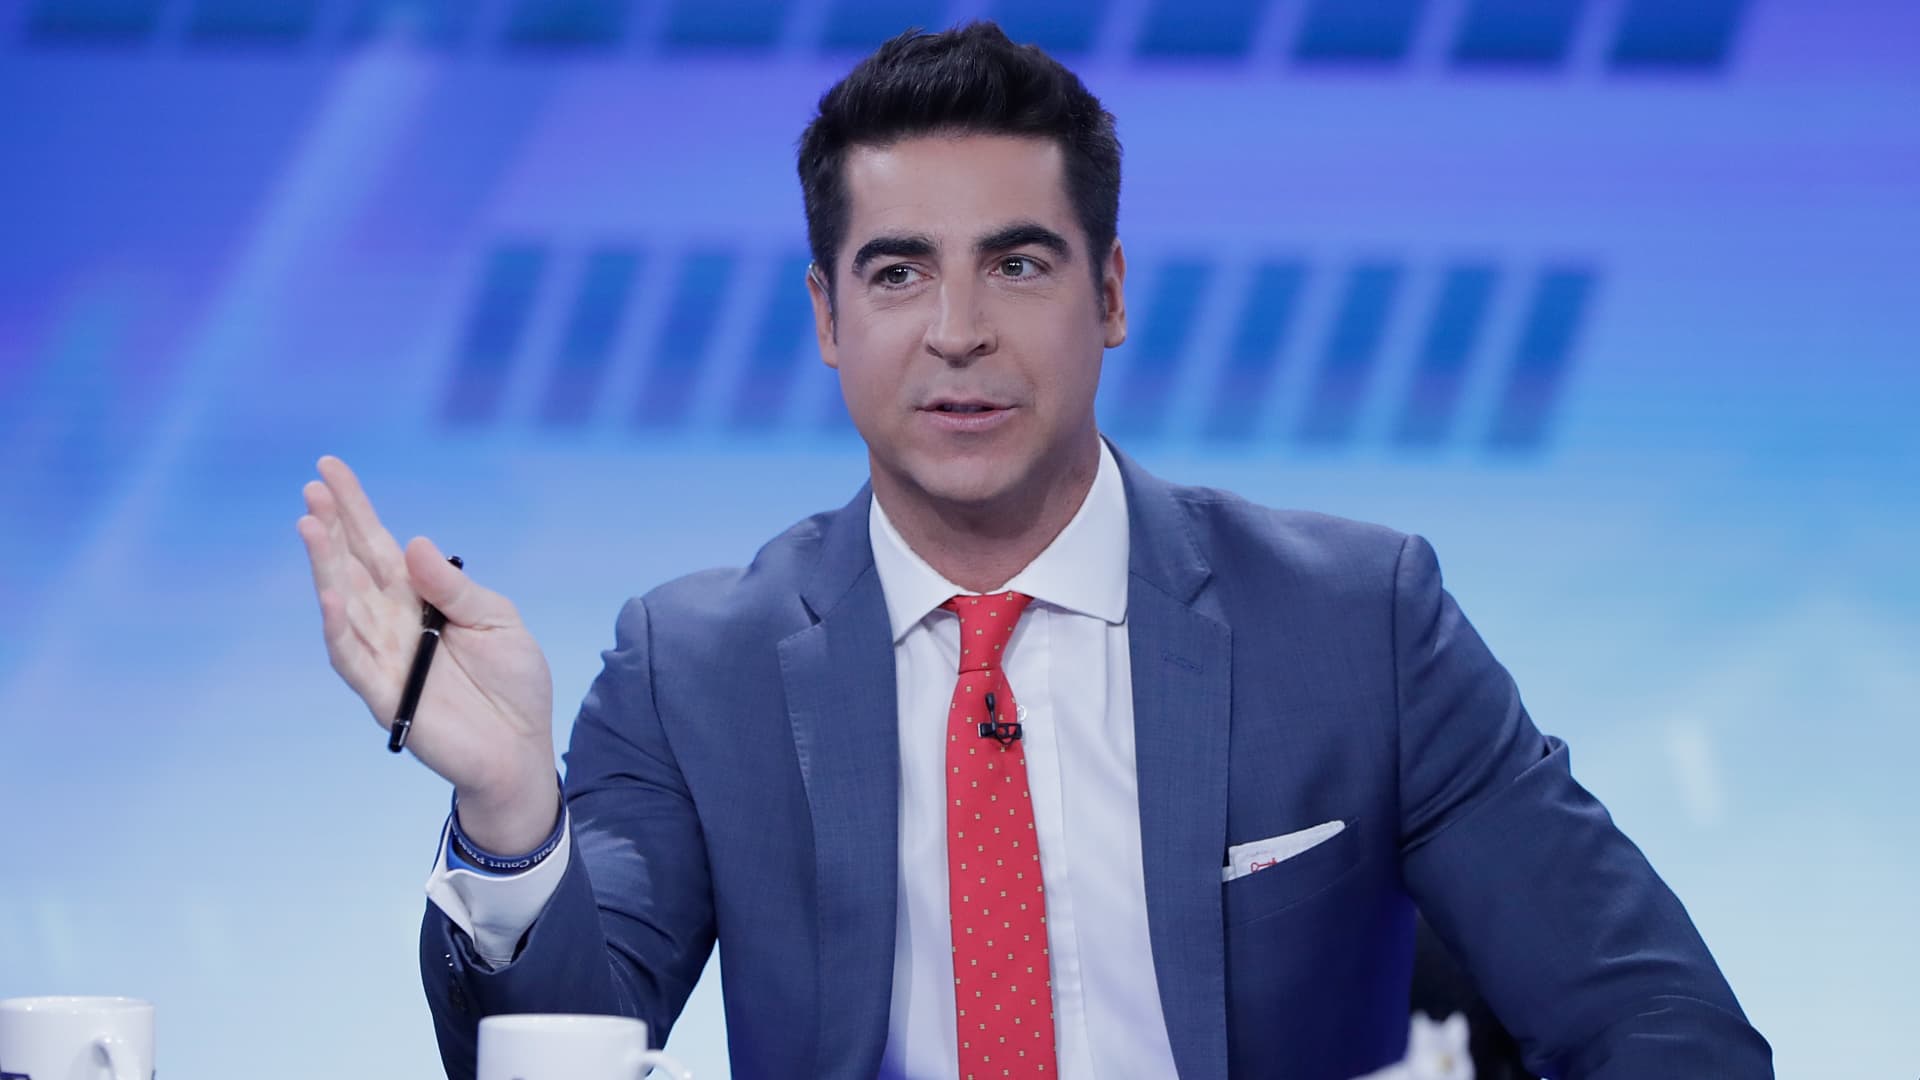 Fox News names Jesse Watters as replacement for Tucker Carlson primetime slot